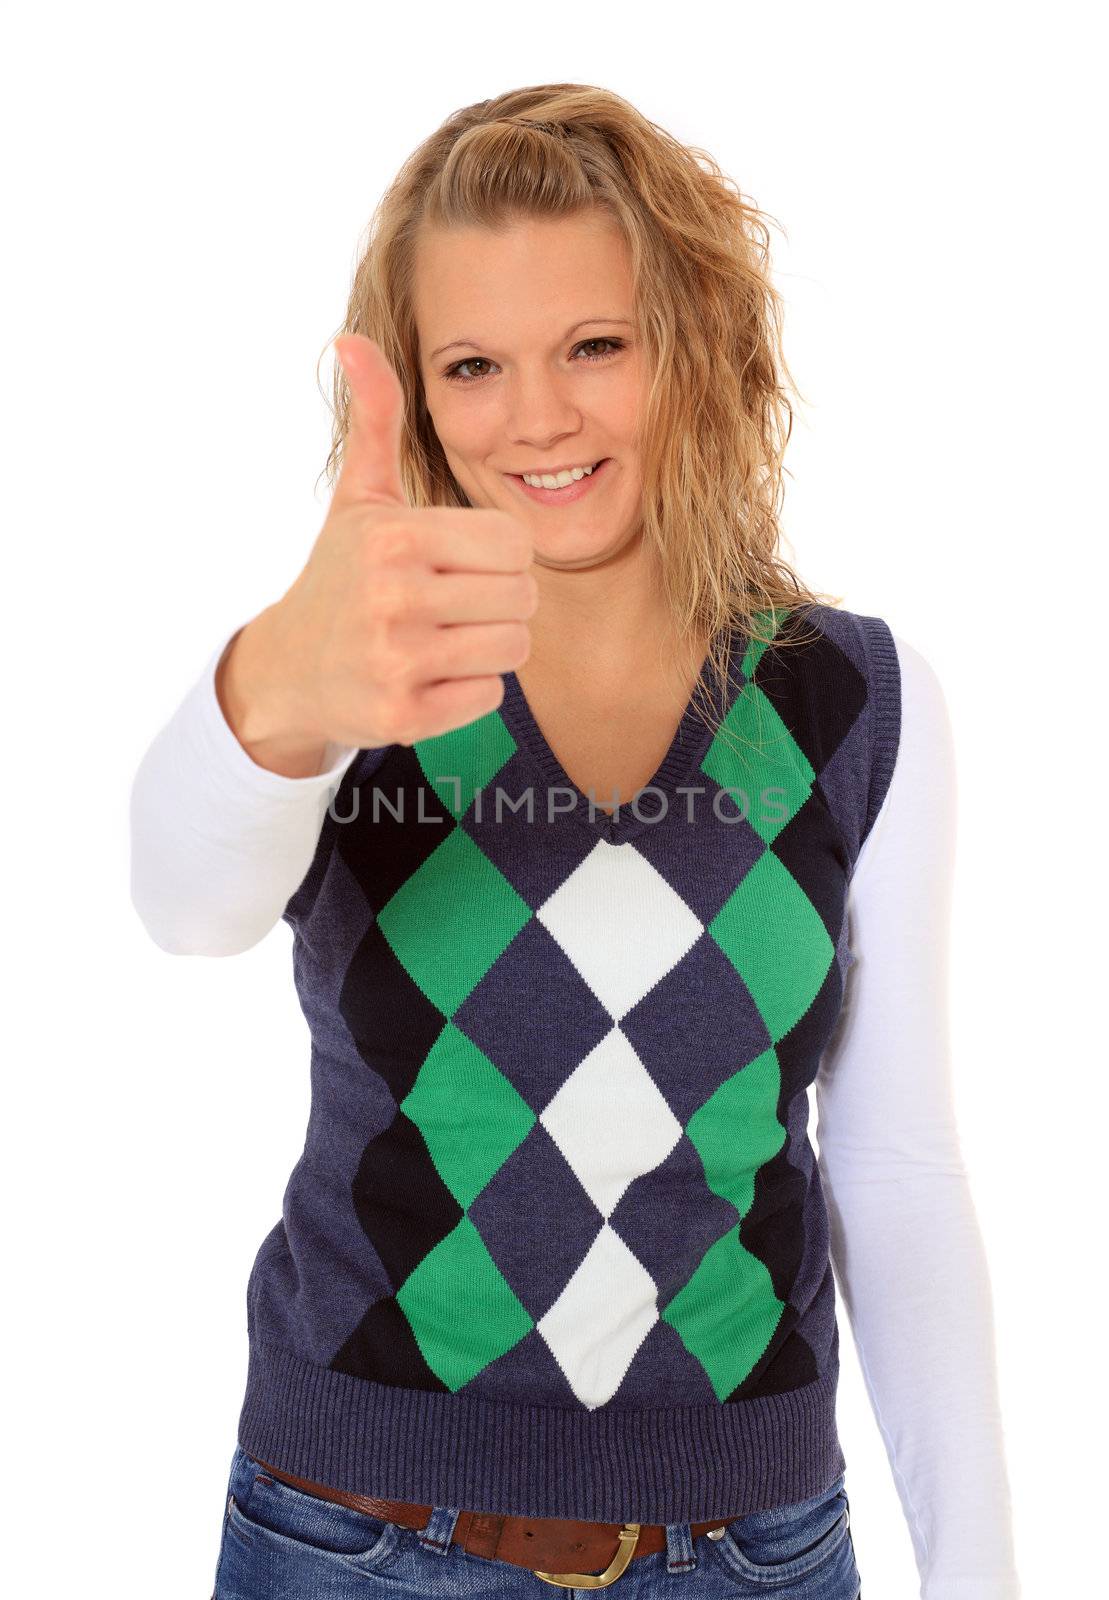 Attractive young woman making positive gesture. All on white background.